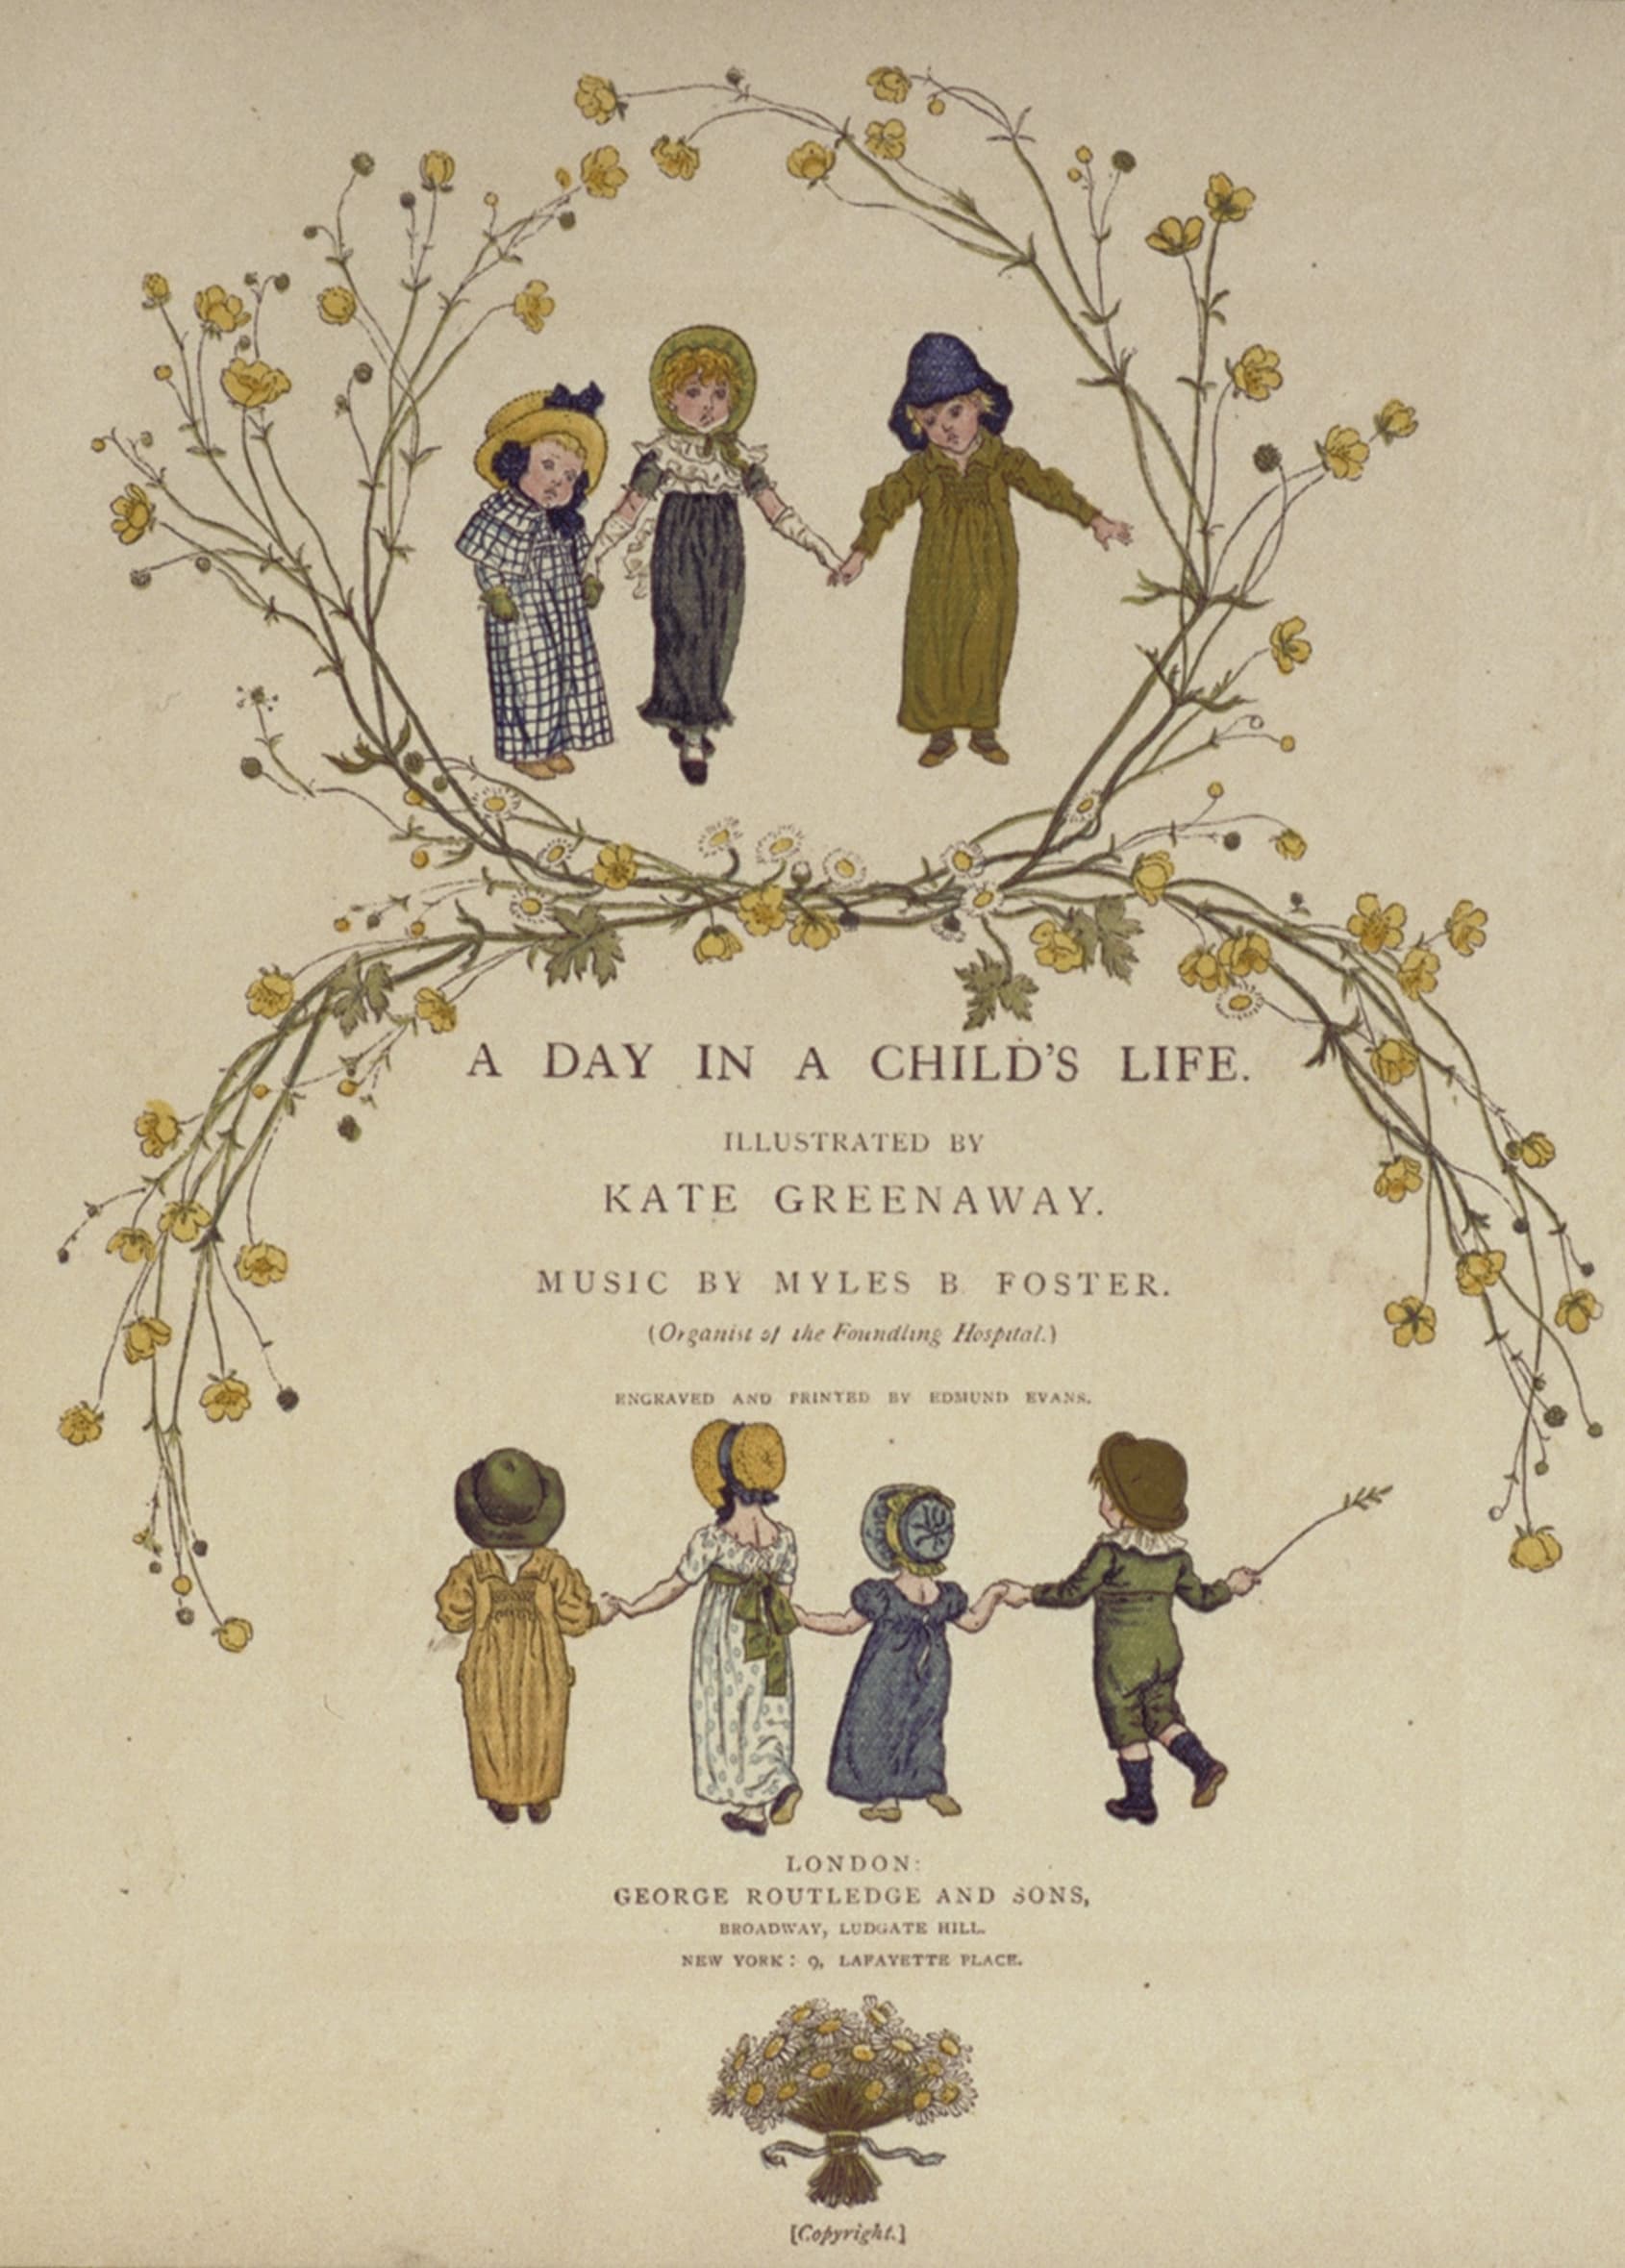 Illustration 2 from “A Day in a Child’s life”